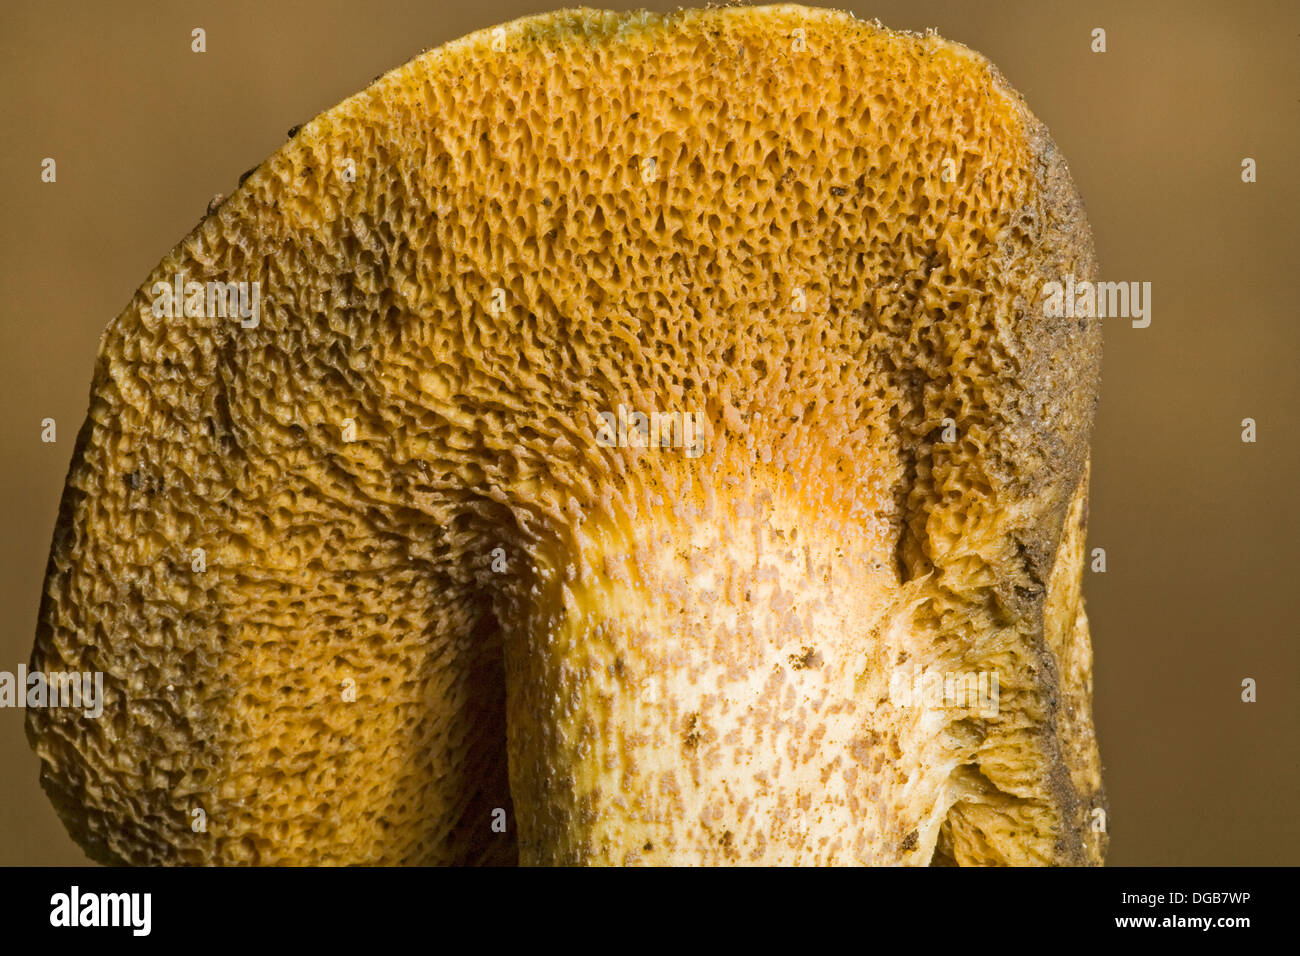 A wild mushroom with pores or sponge instead of gills Stock Photo